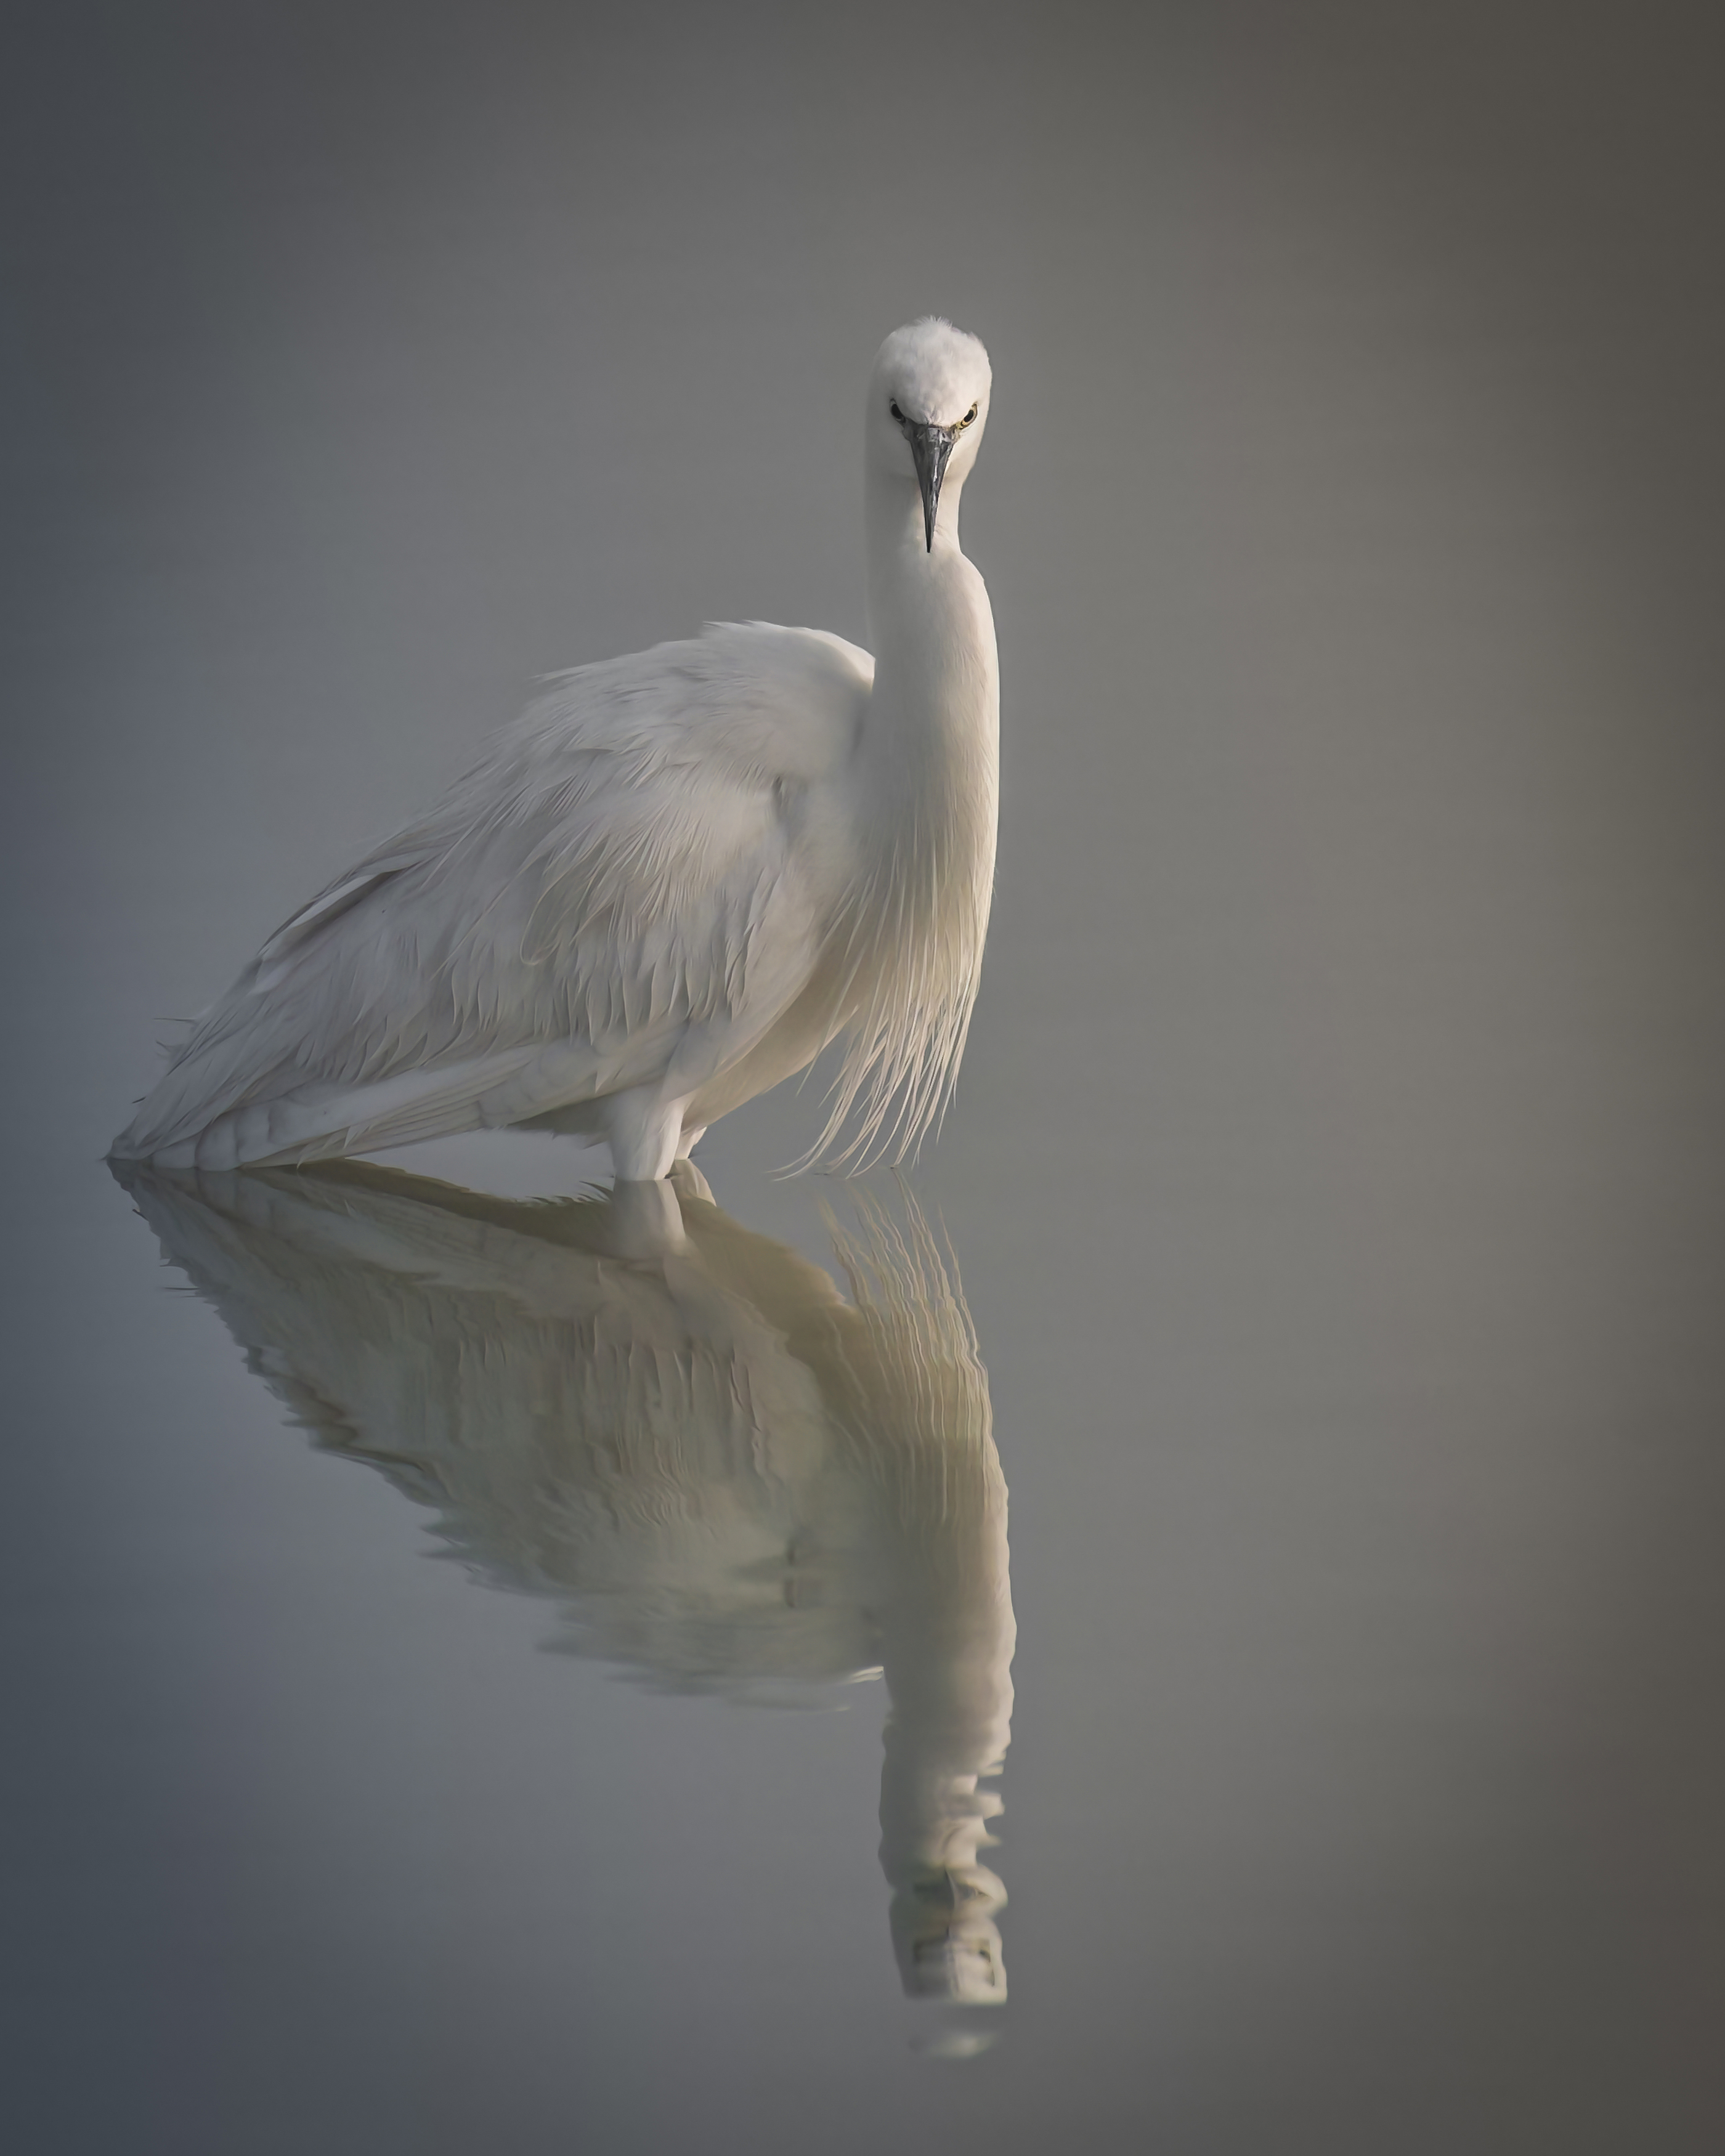 fog,morning,lake,reflection,river,water,sunrise,animals,bird,foggy,feather,sun,animal,birds,close-up,sunny,feathers,closeup,day,egret,wings,wing,little egret,still water, Ahmed Zaeitar